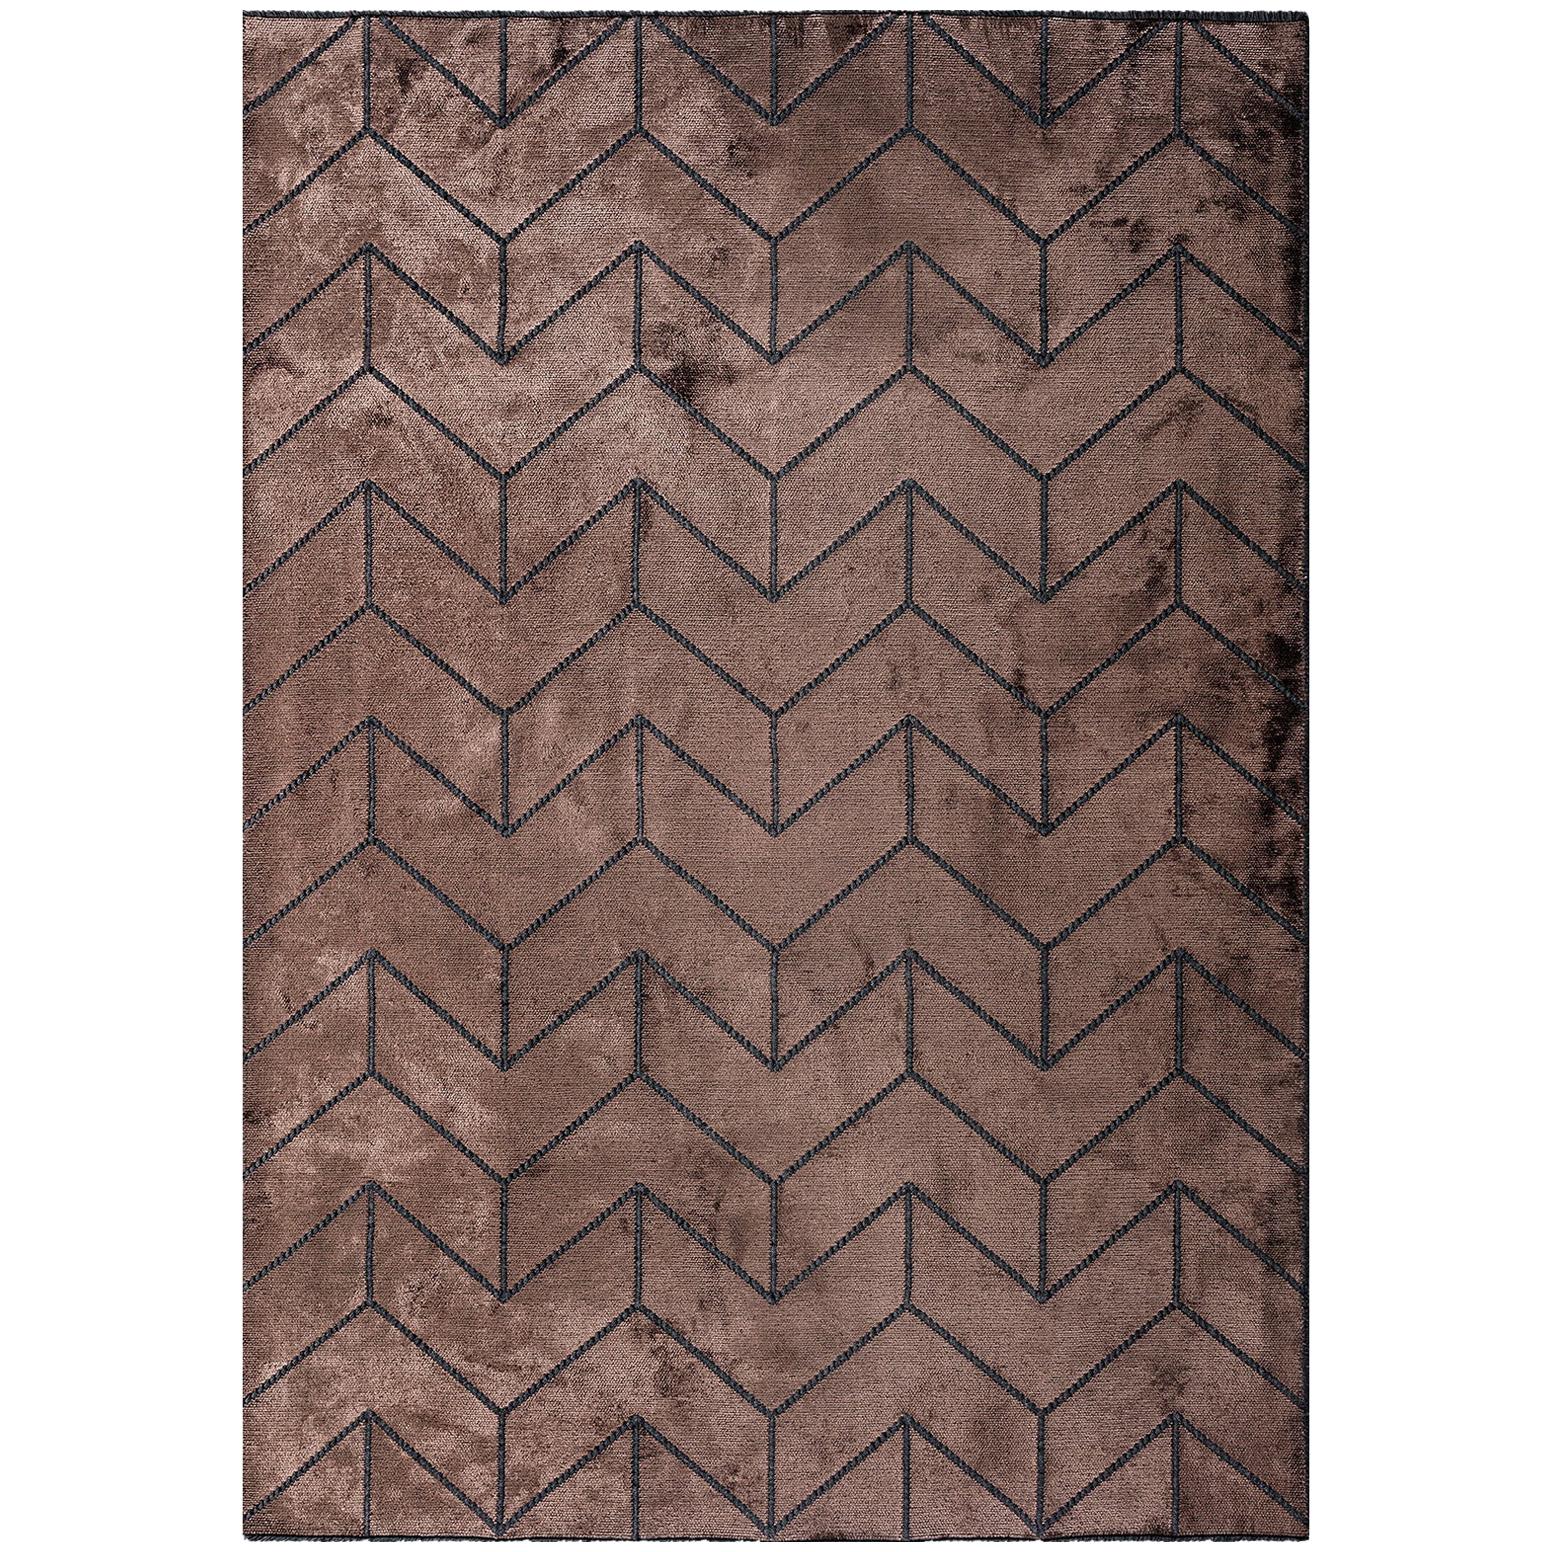 Contemporary Chevron Dark Brown Charcoal Luxury Area Rug Fringe Optional For Sale